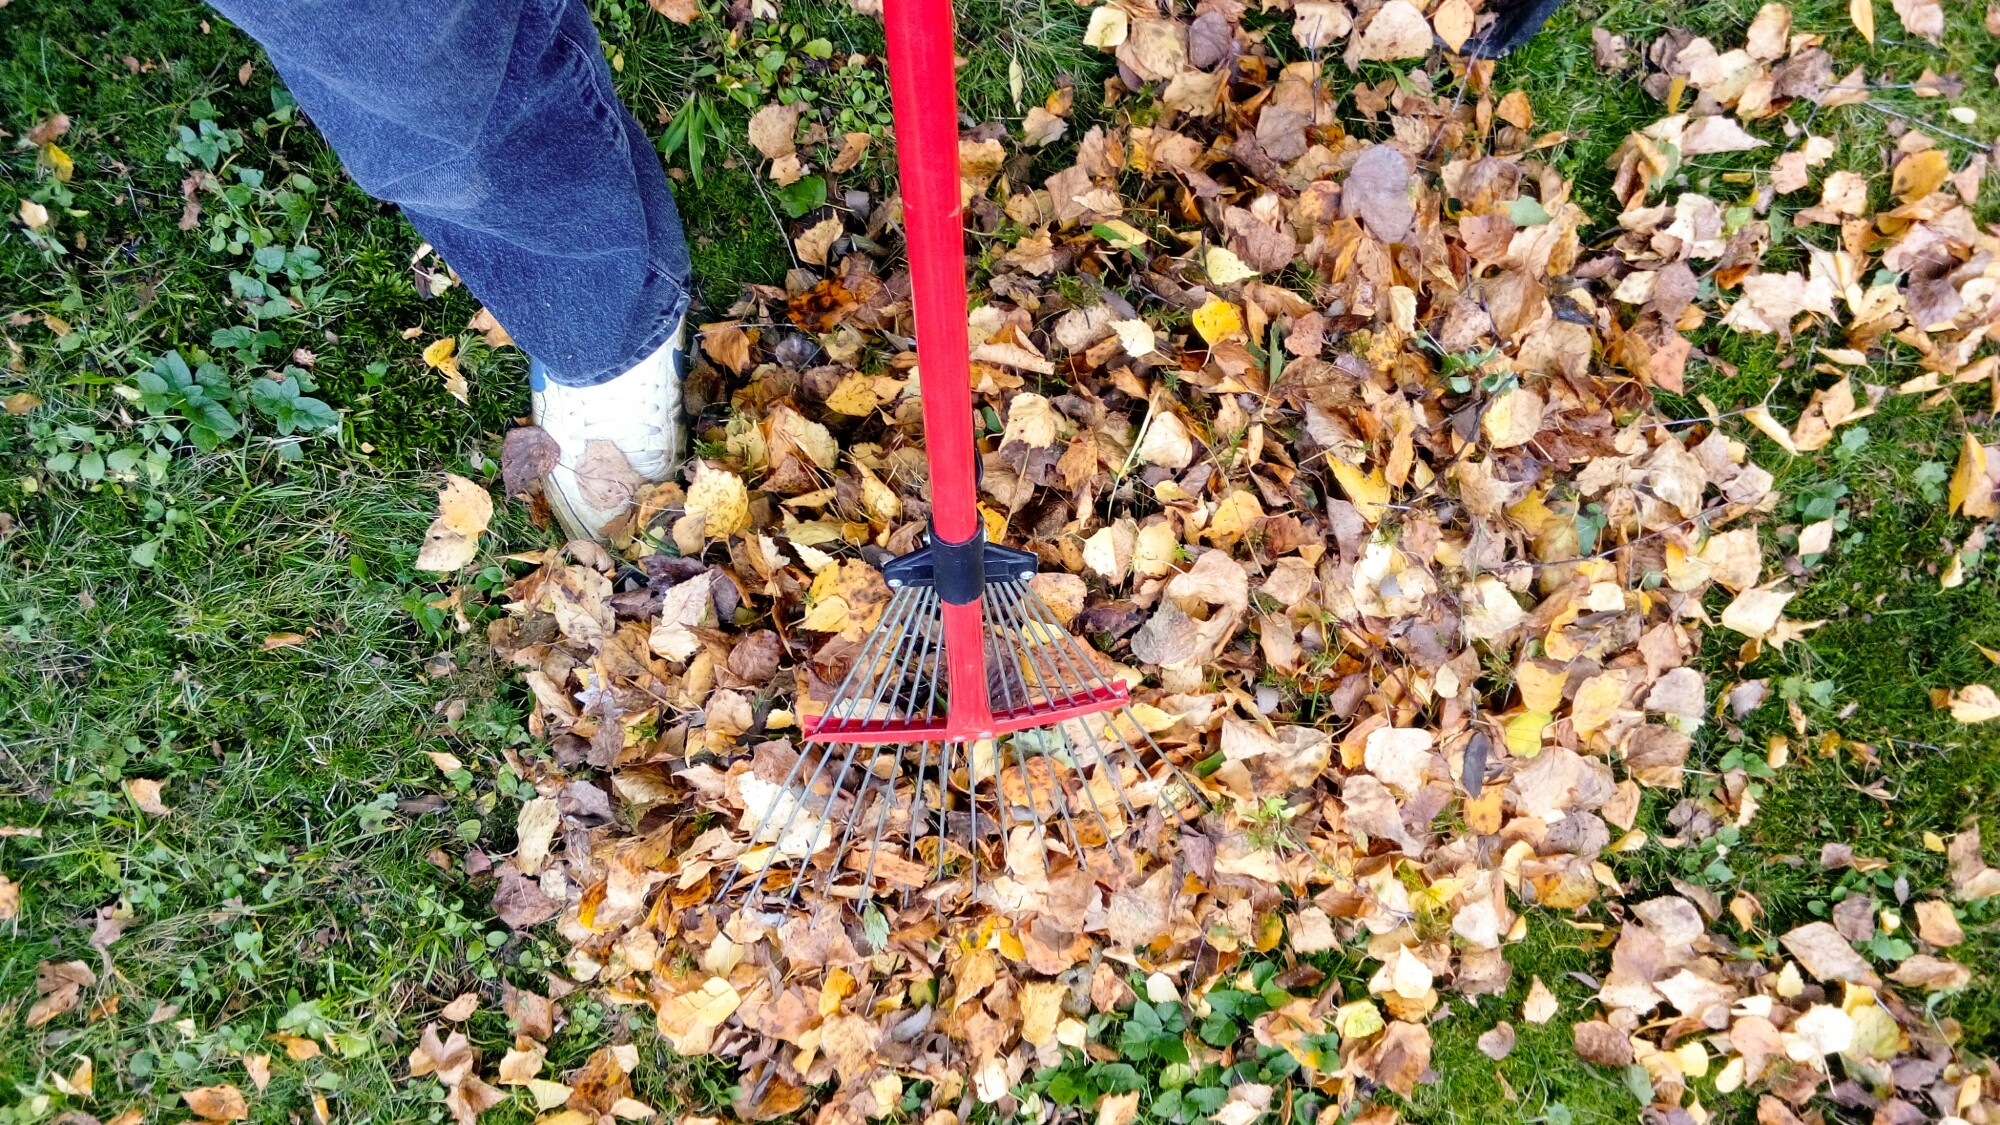 Your yard will eventually get messy as the weather and seasons change. Here's what you can do to clean up your messy yard.